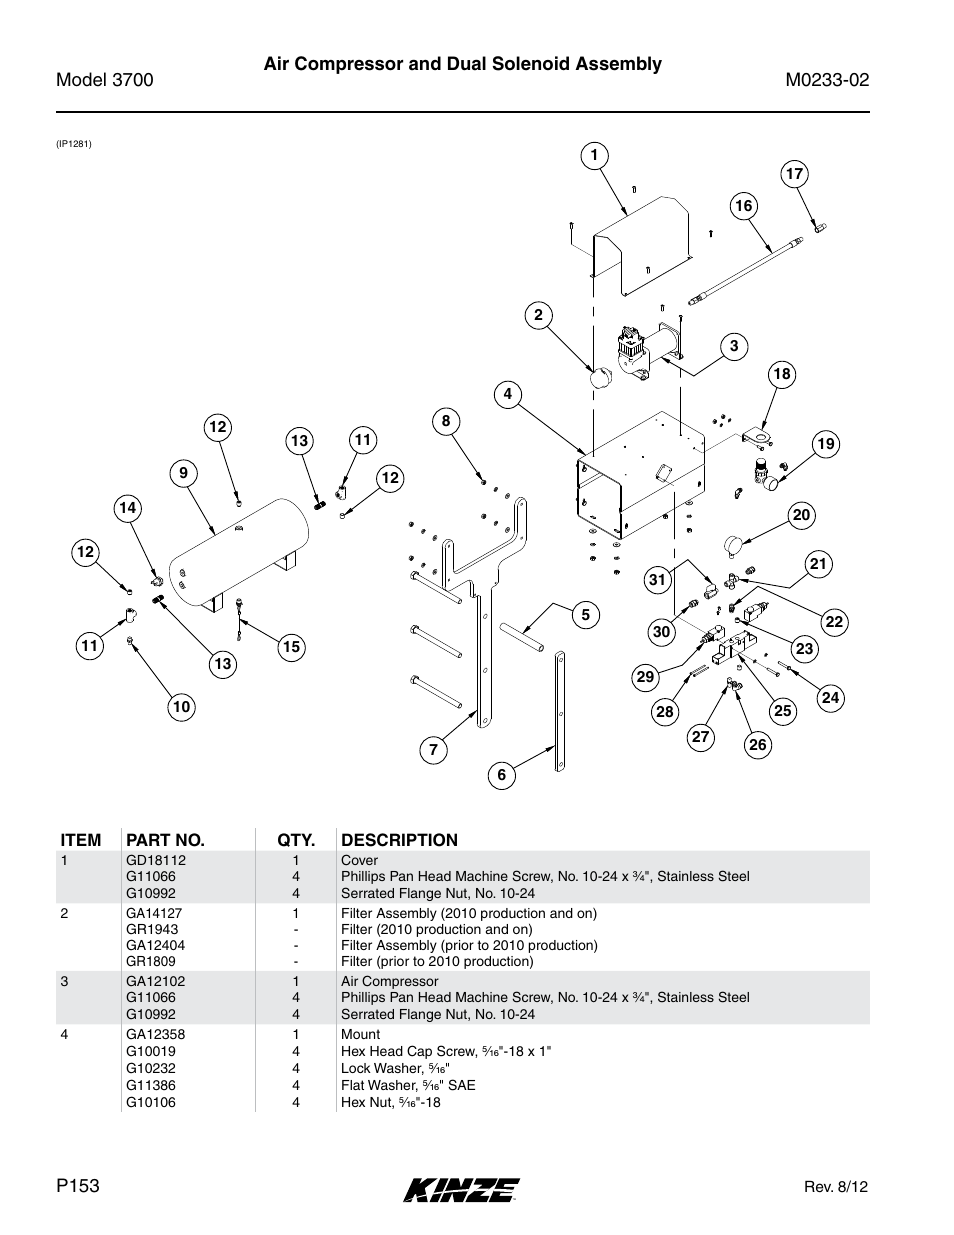 Air compressor and dual solenoid assembly | Kinze 3700 Front Folding Planter Rev. 6/14 User Manual | Page 156 / 284